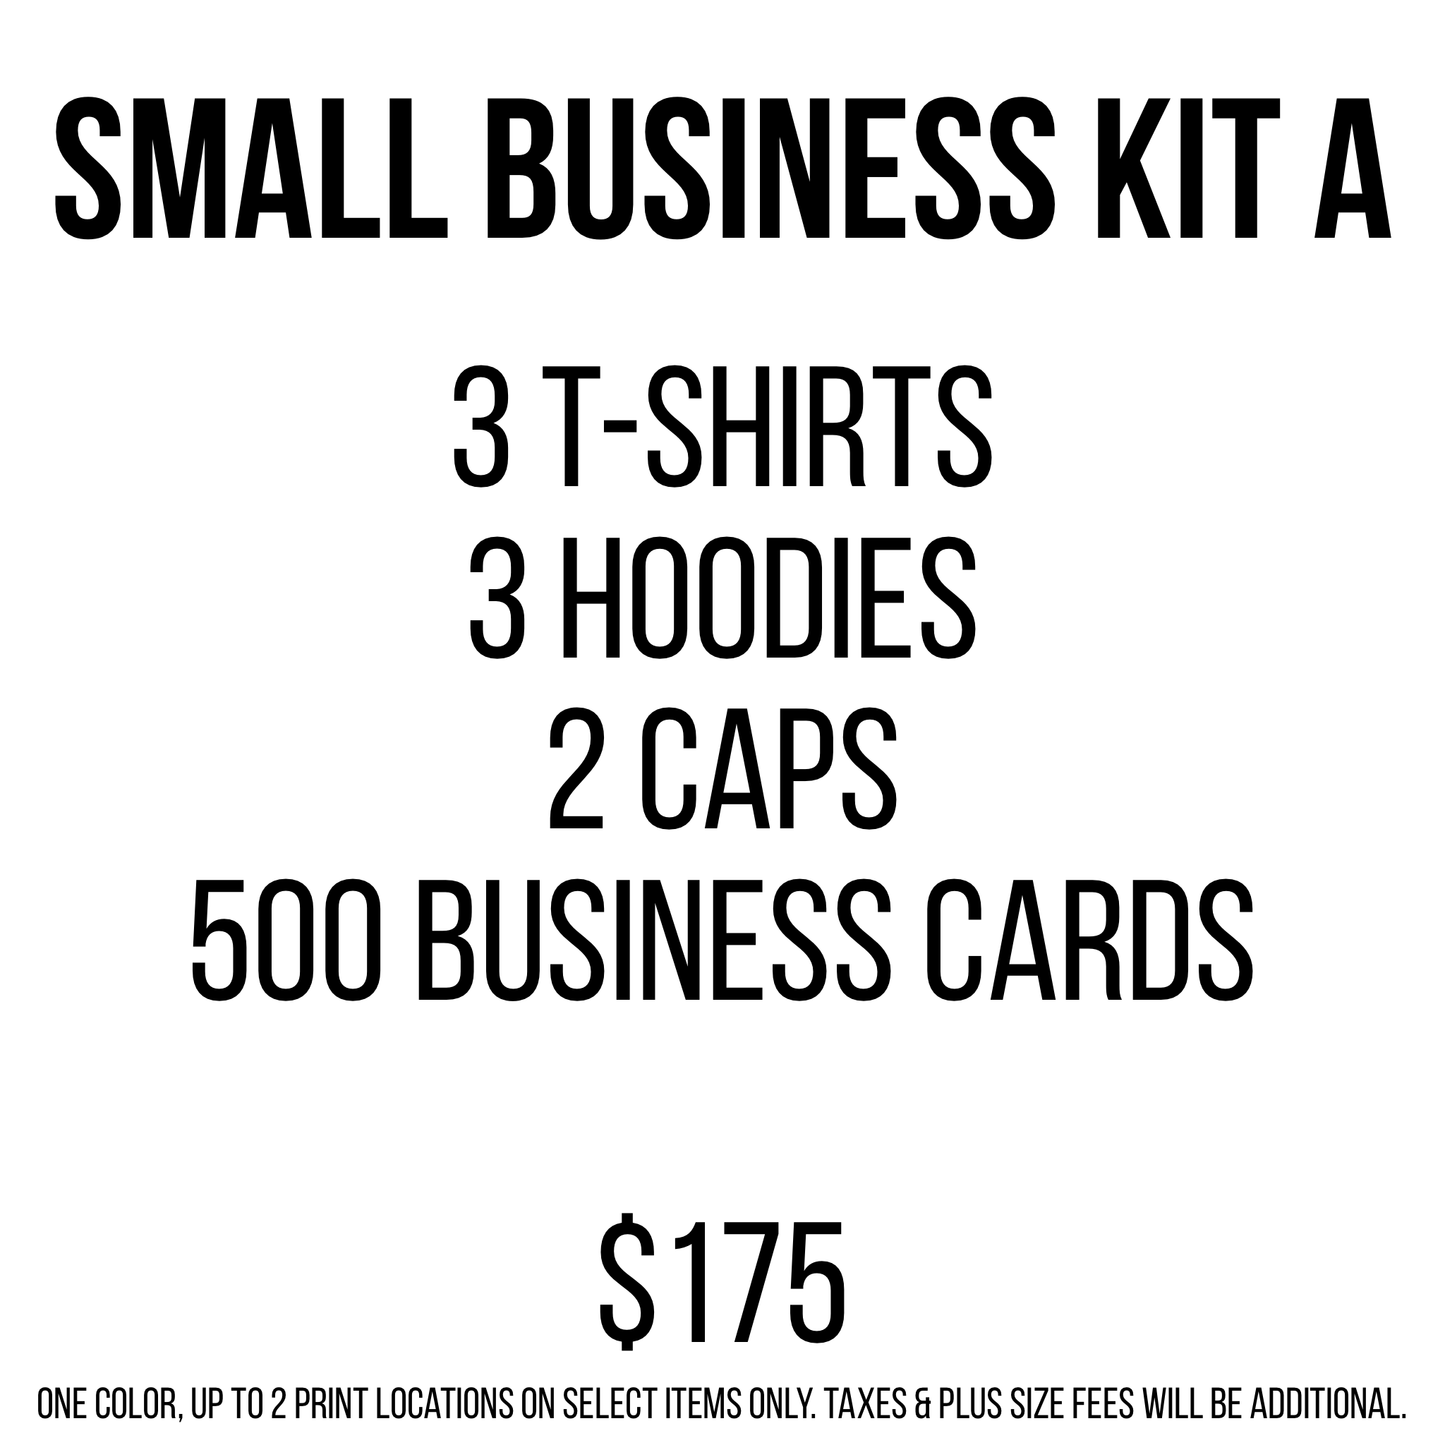 Small Business Kit A